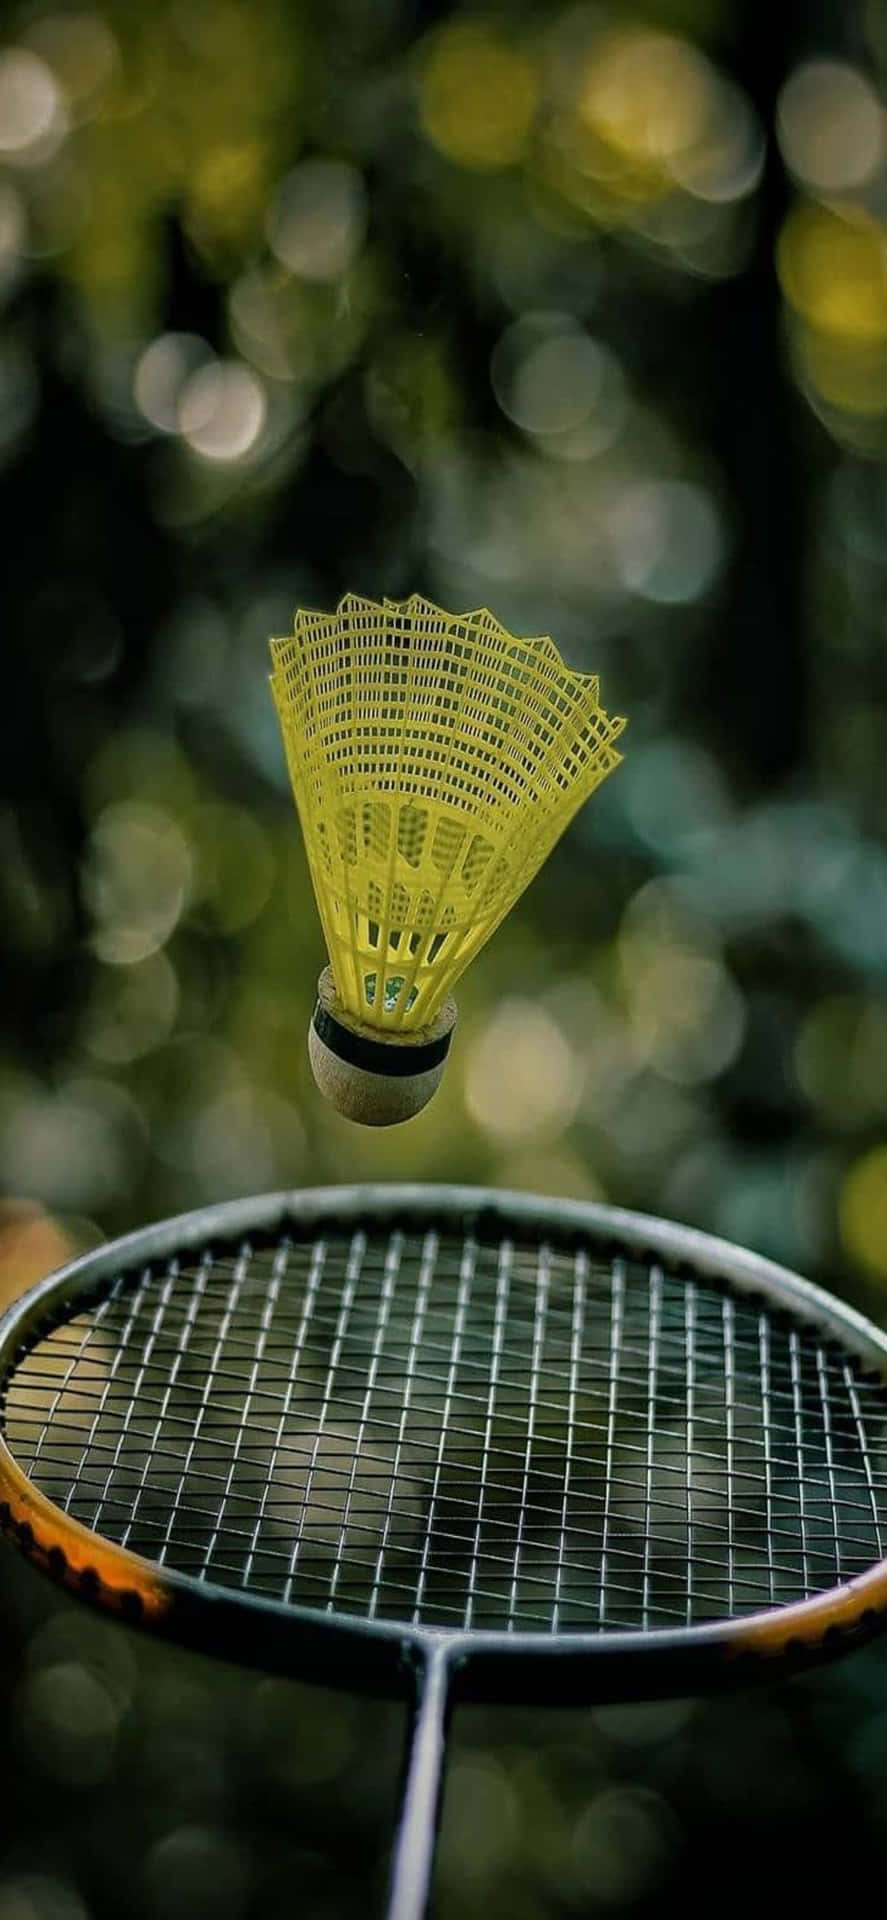 "Rise to Victory with Iphone Xs Max Badminton"